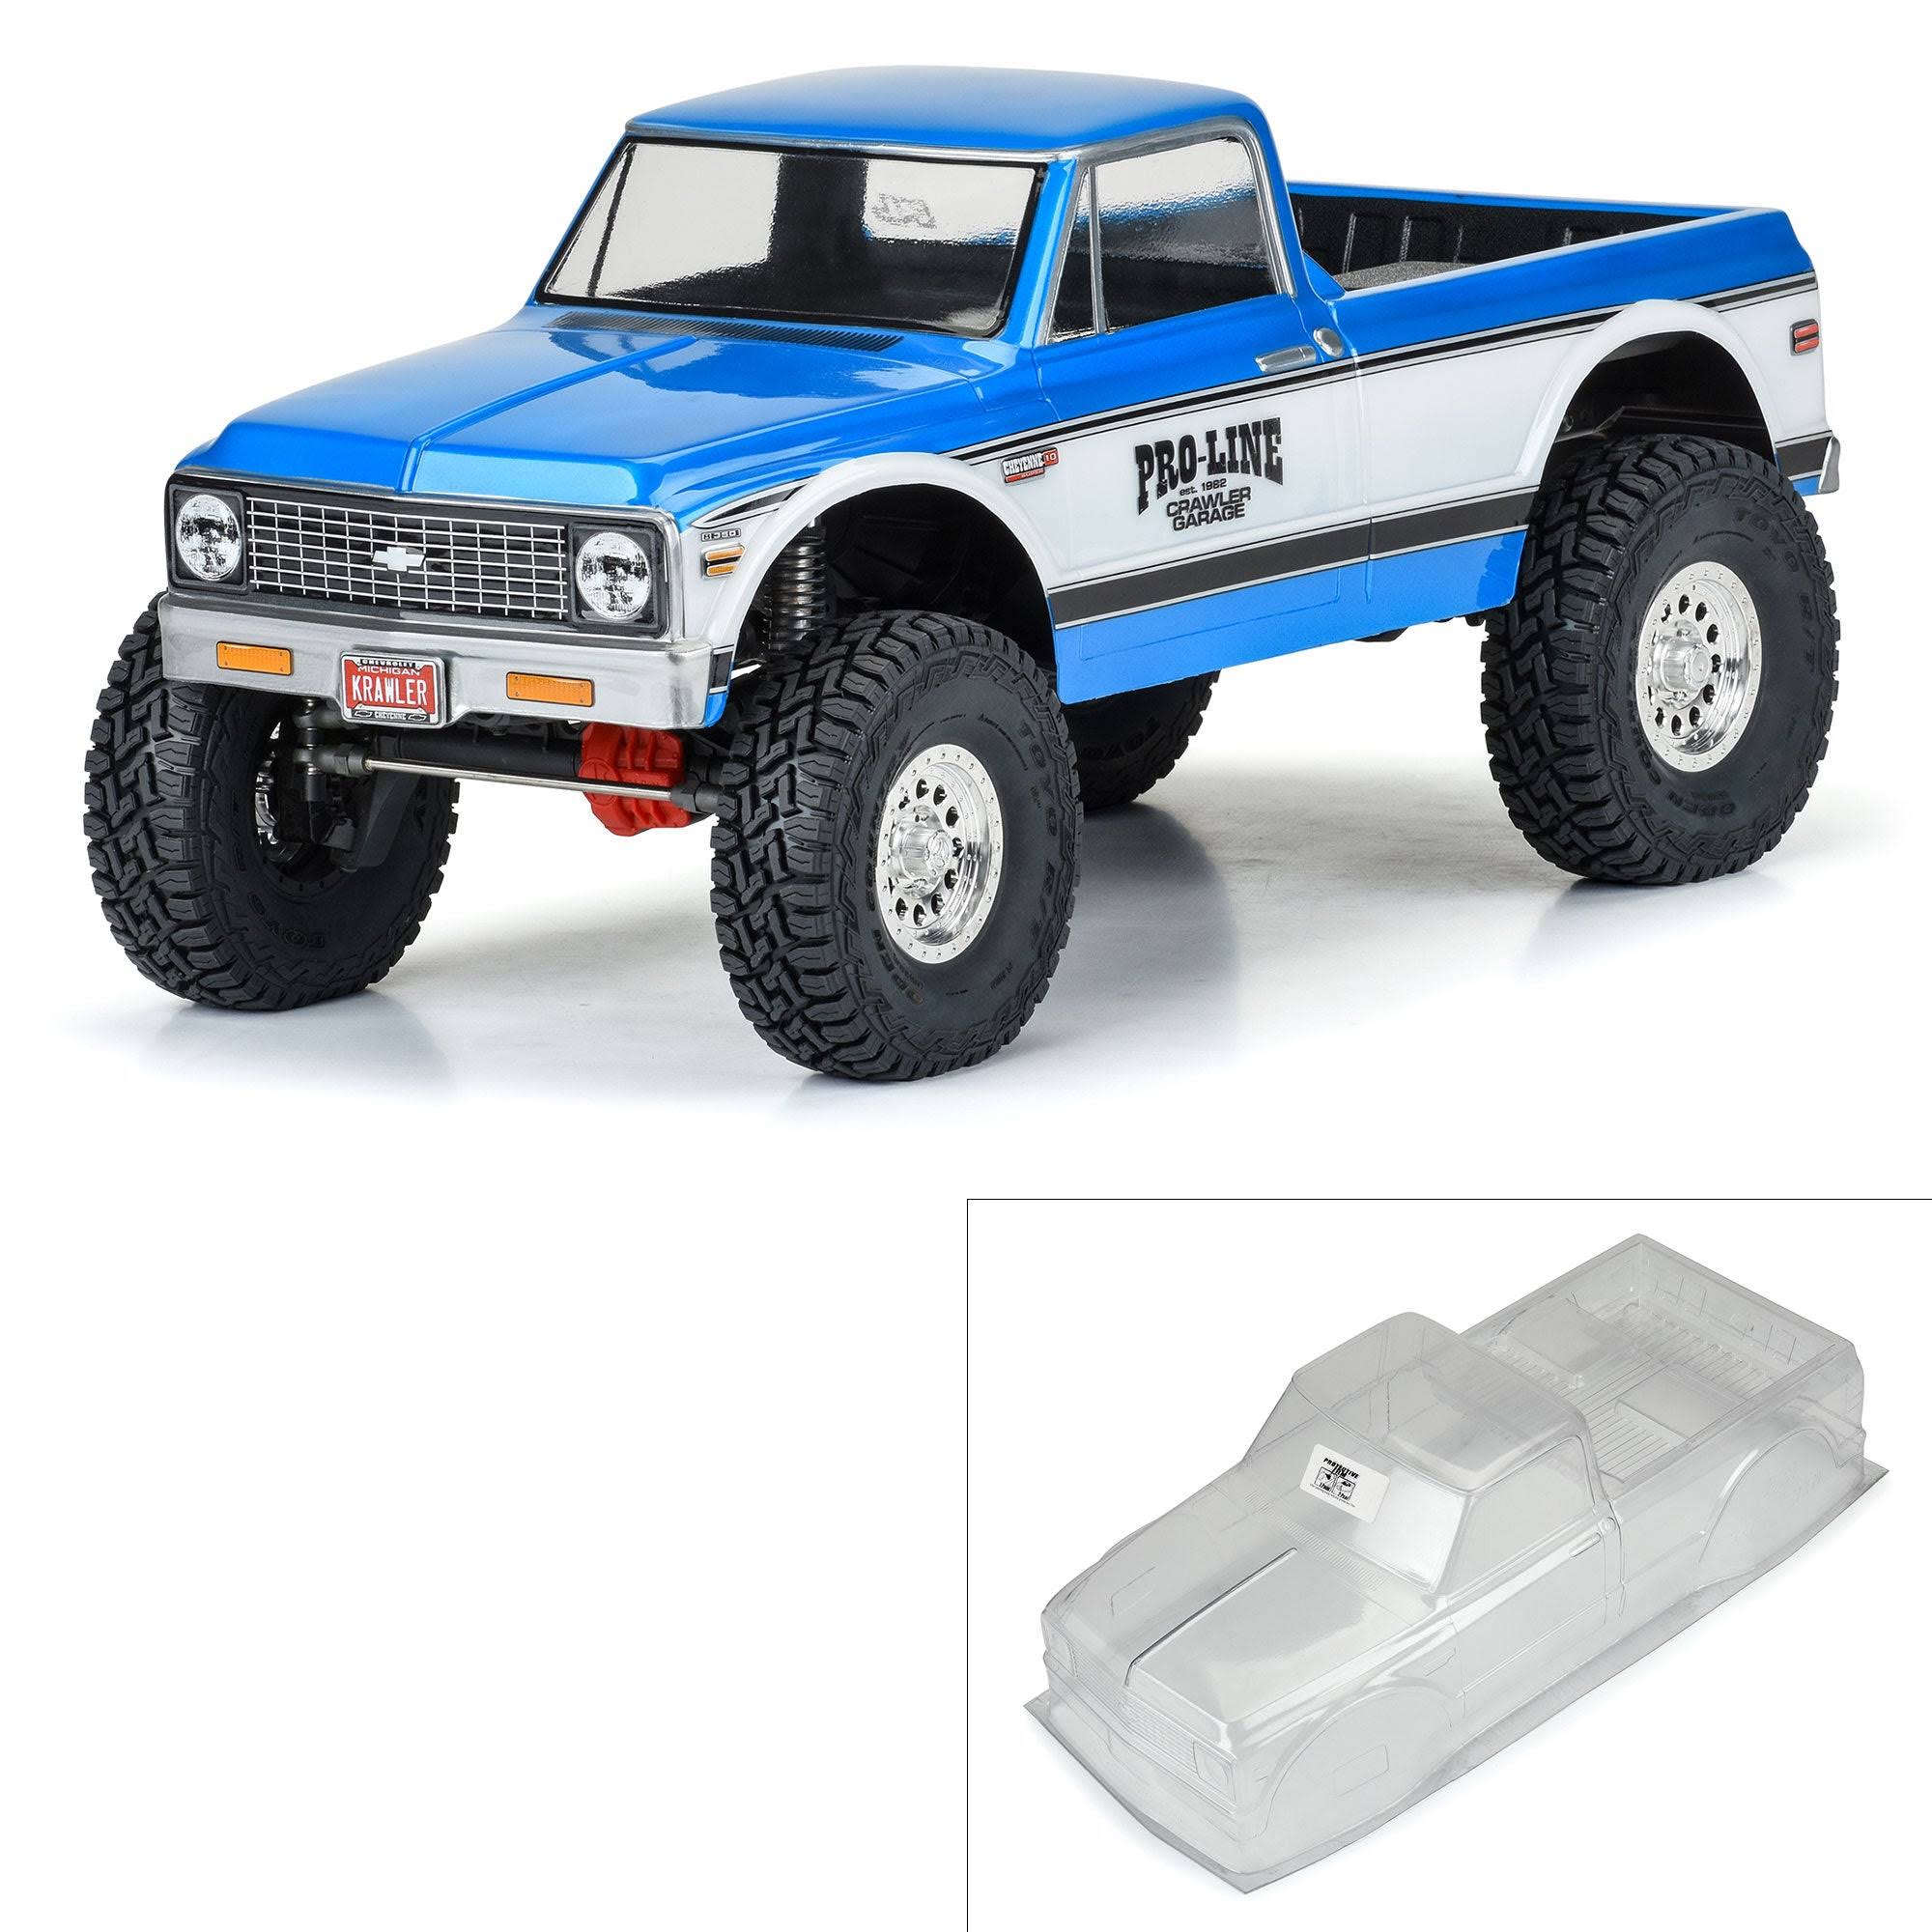 Proline Racing PRO 360400 Pro-Line 1972 Chevy K-10 Clear Body for 12.3" (313mm) Crawlers